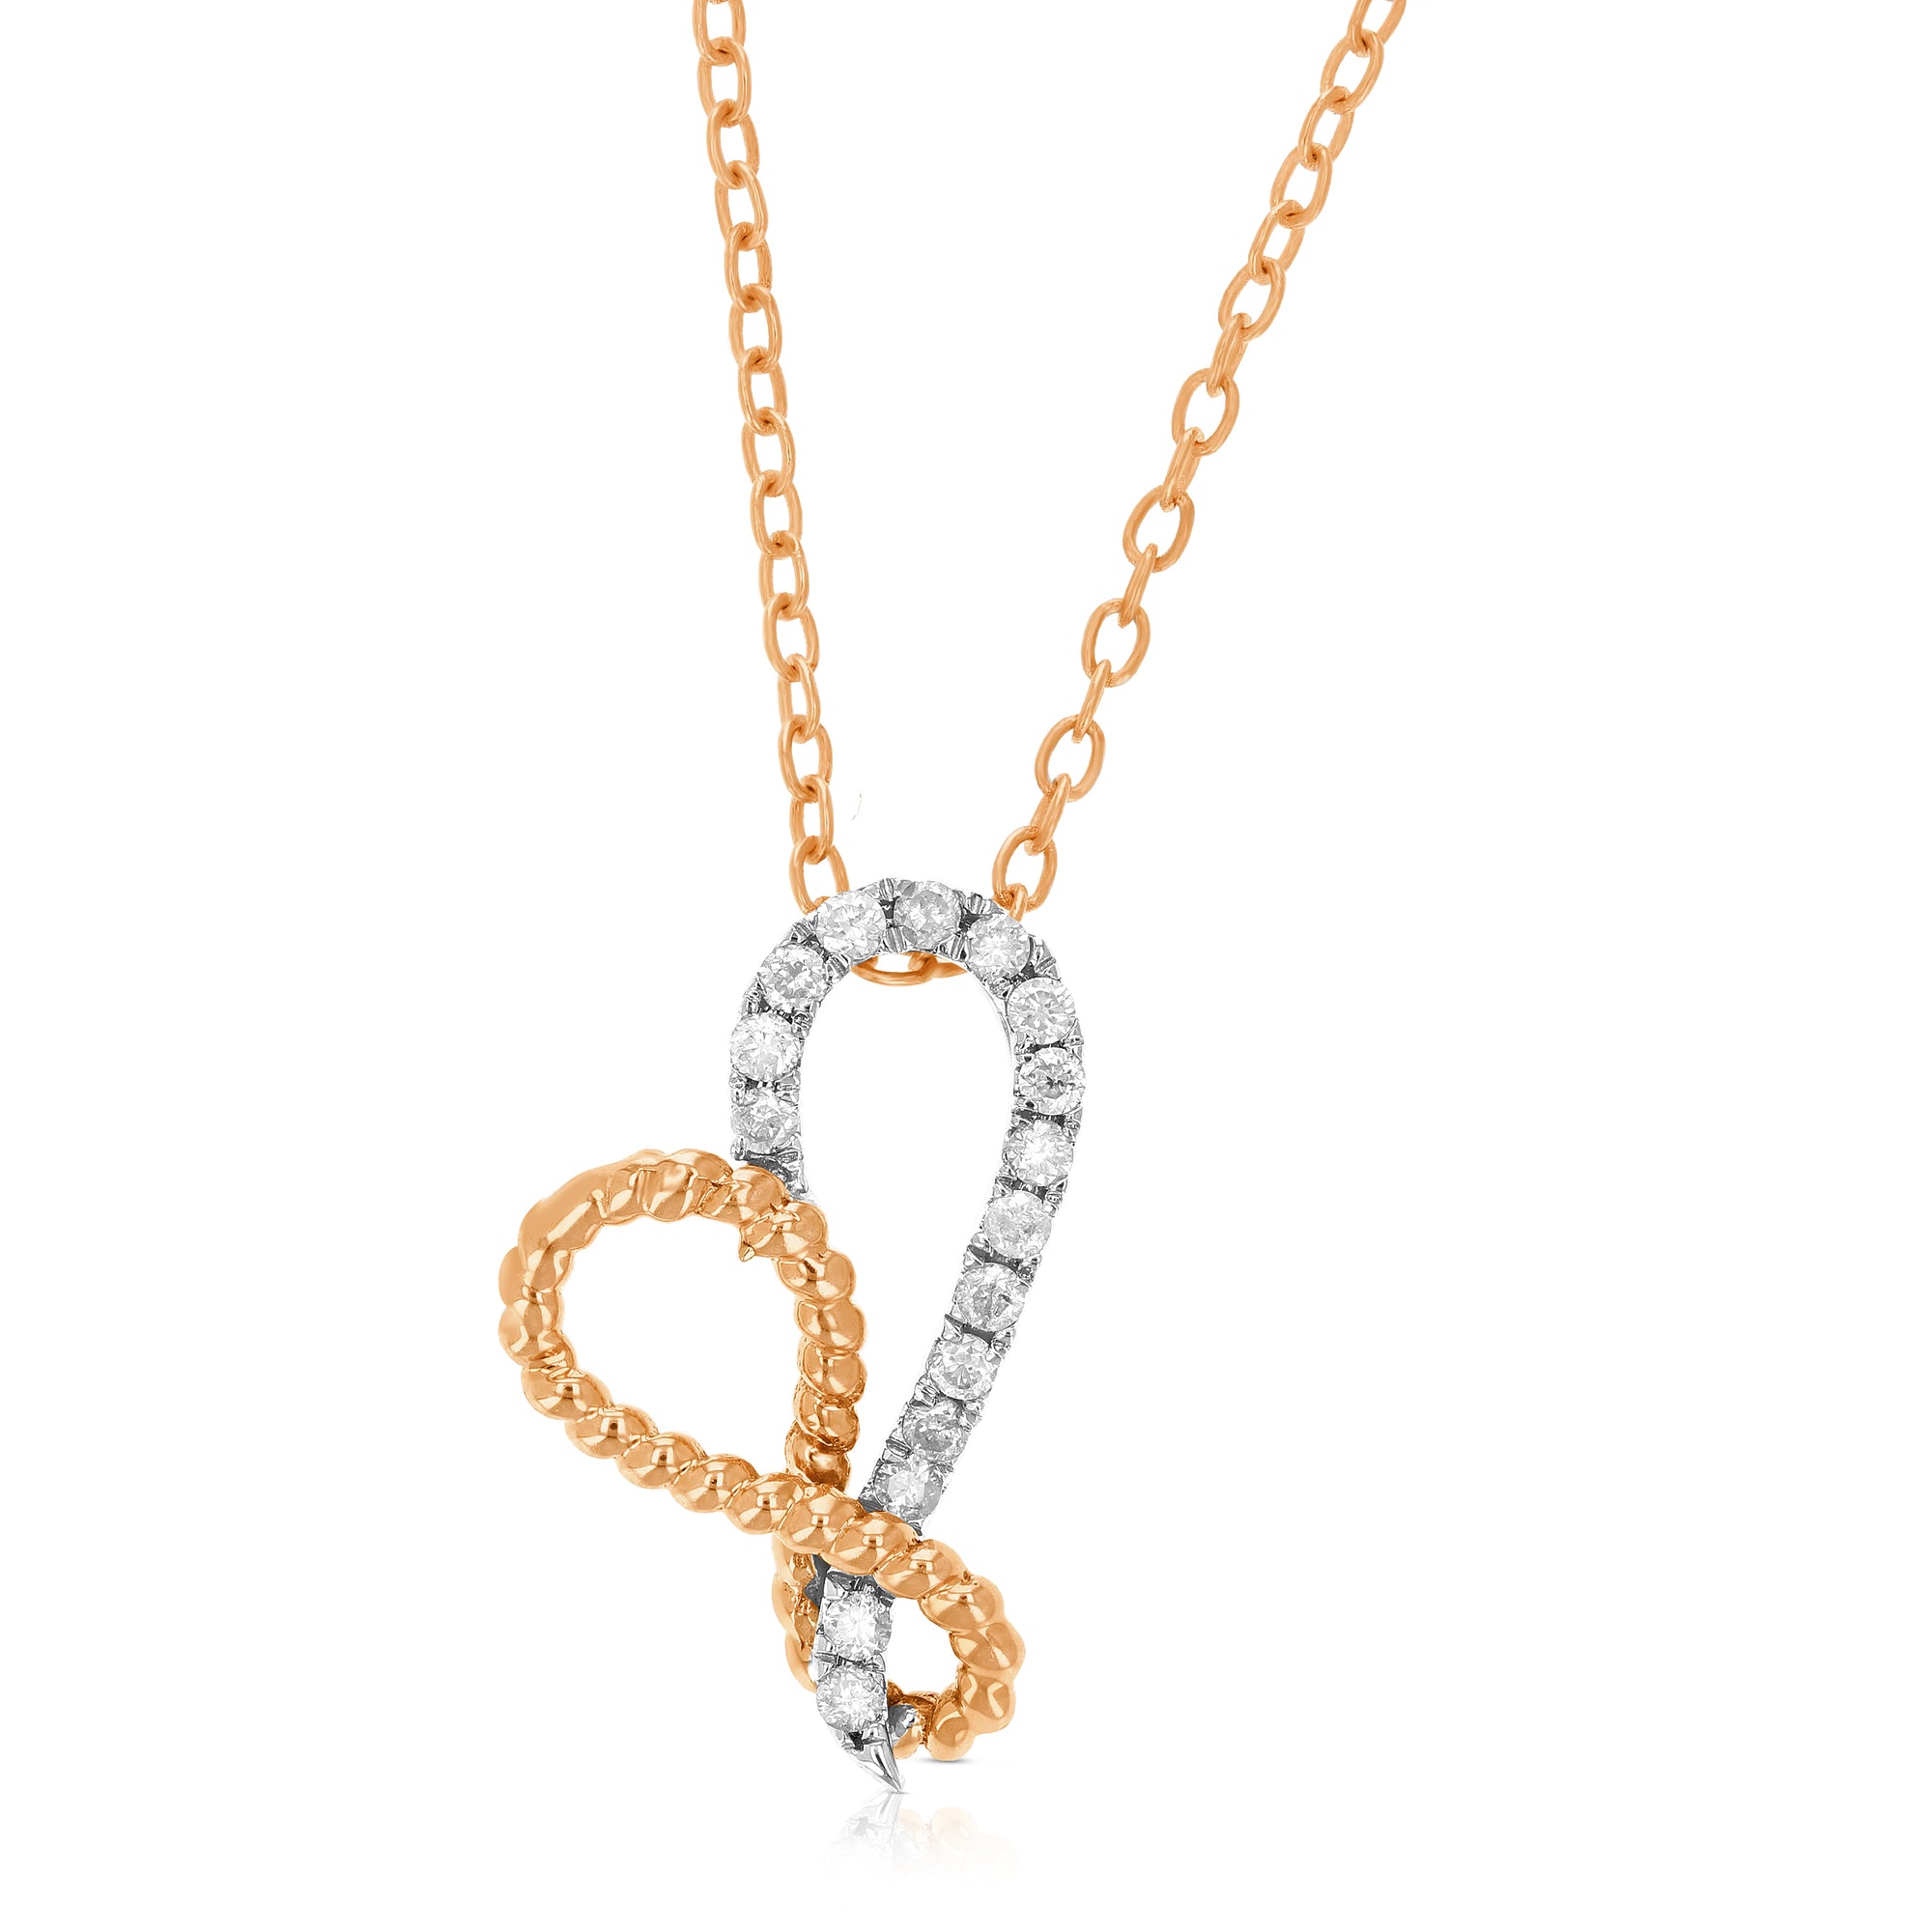 1/6 cttw Diamond Pendant, Diamond Heart Pendant Necklace for Women in 14K White and Rose Gold with 18 Inch Chain, Prong Setting